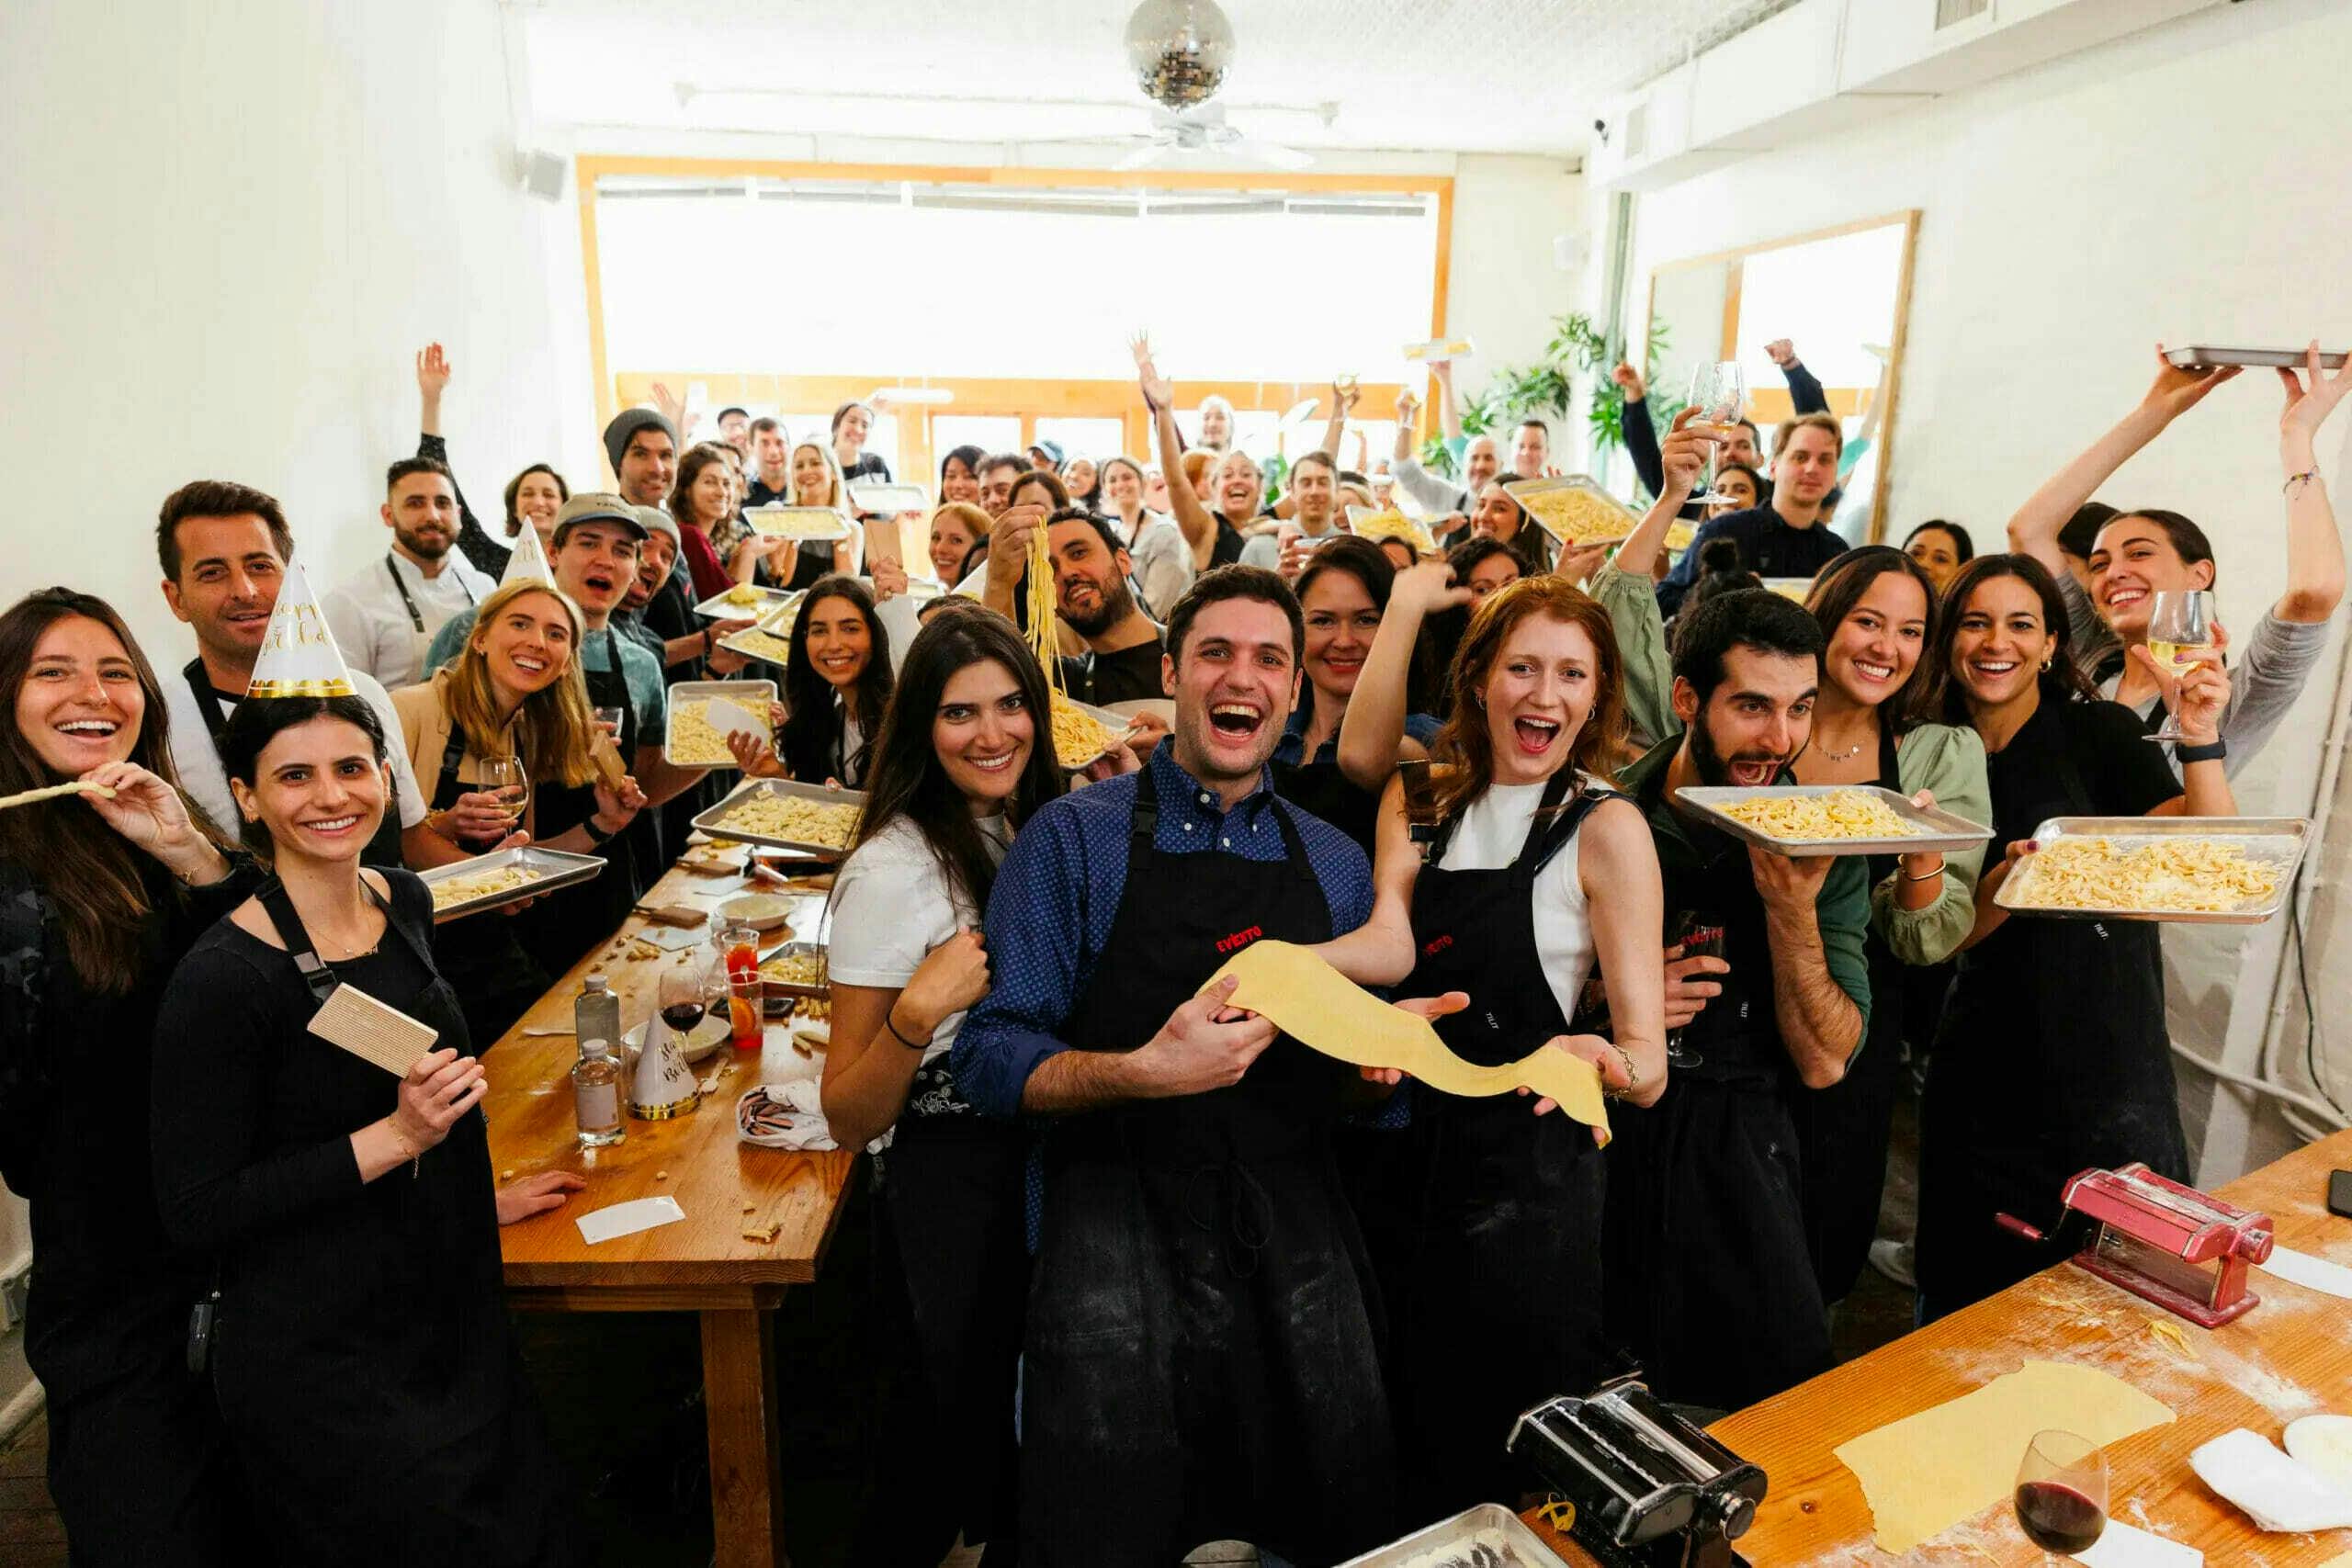 a large group of people showing the pizza they made together